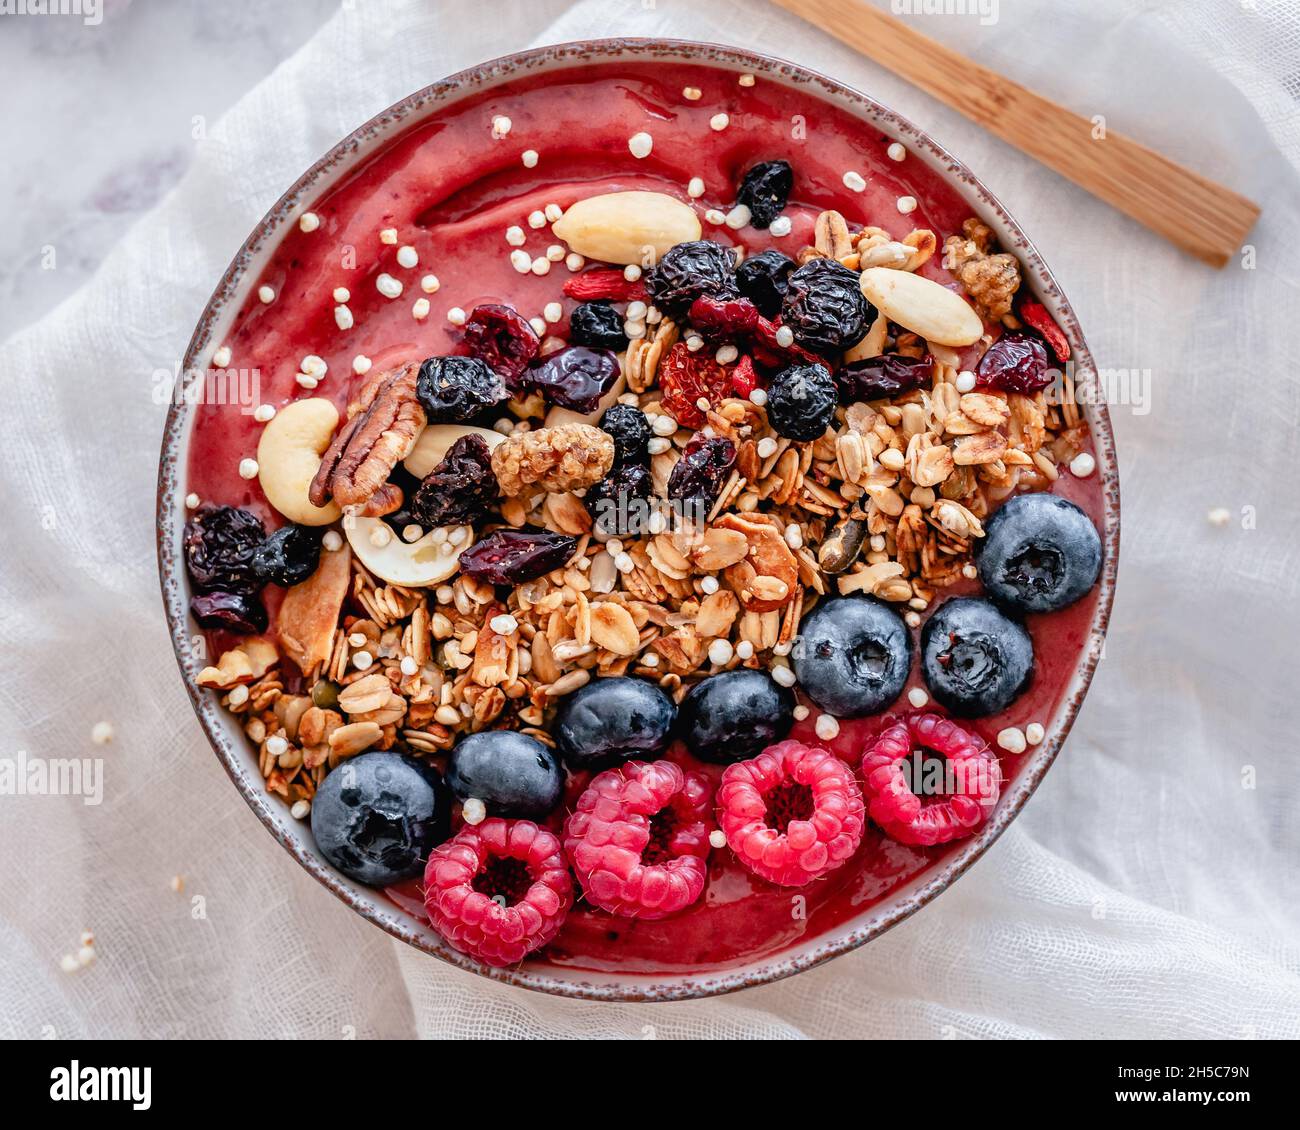 Smoothie bowl with raspberries, blueberries, granola, dried fruits, nuts and puffed quinoa Stock Photo